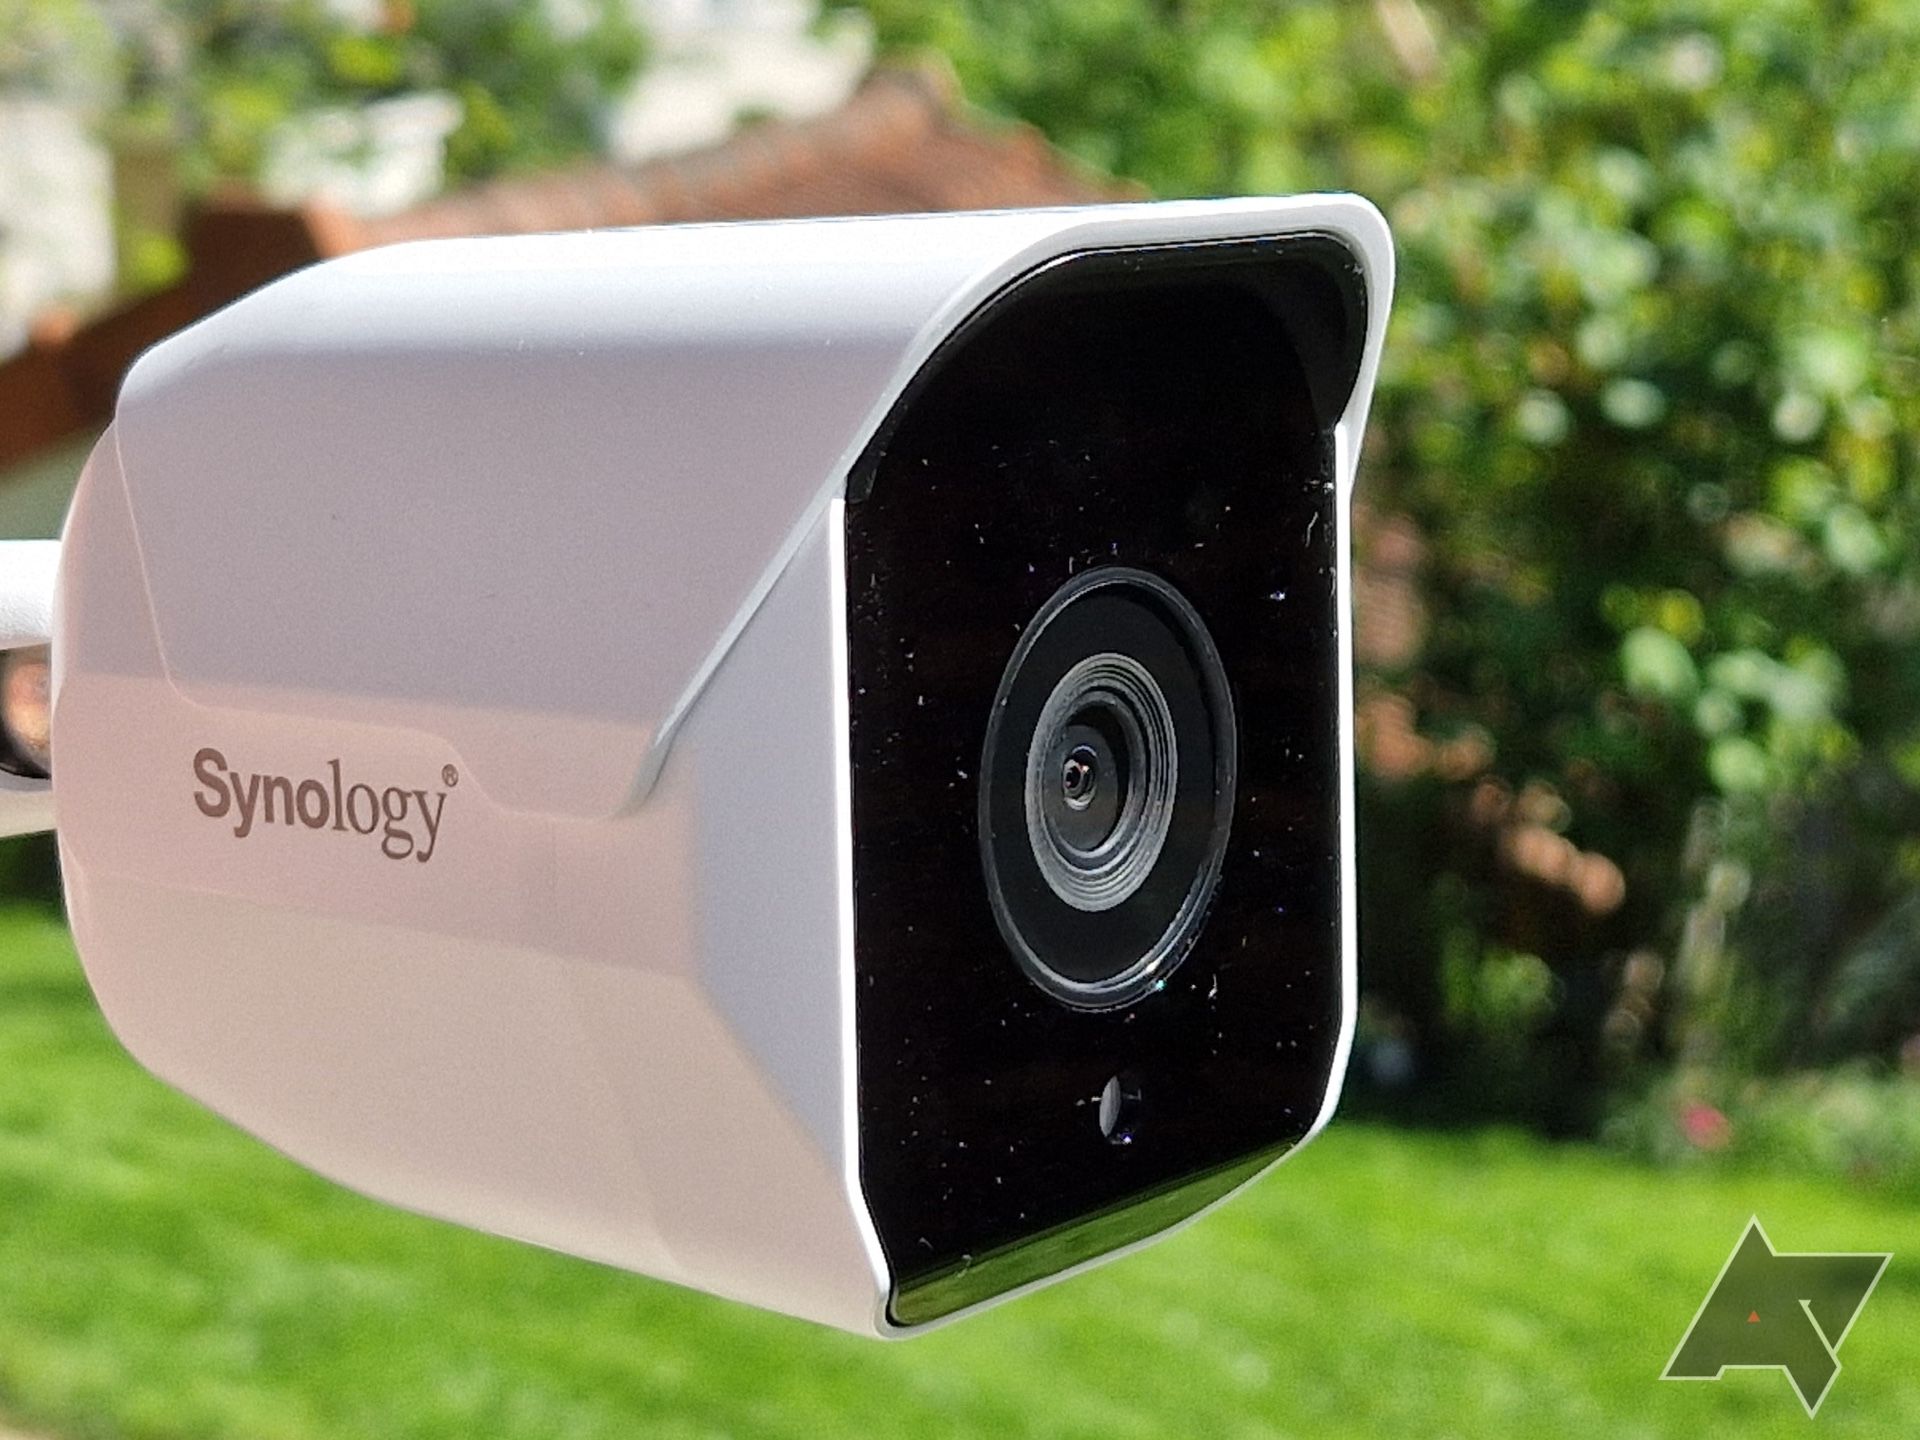 Synology BC500 camera with a garden in the background